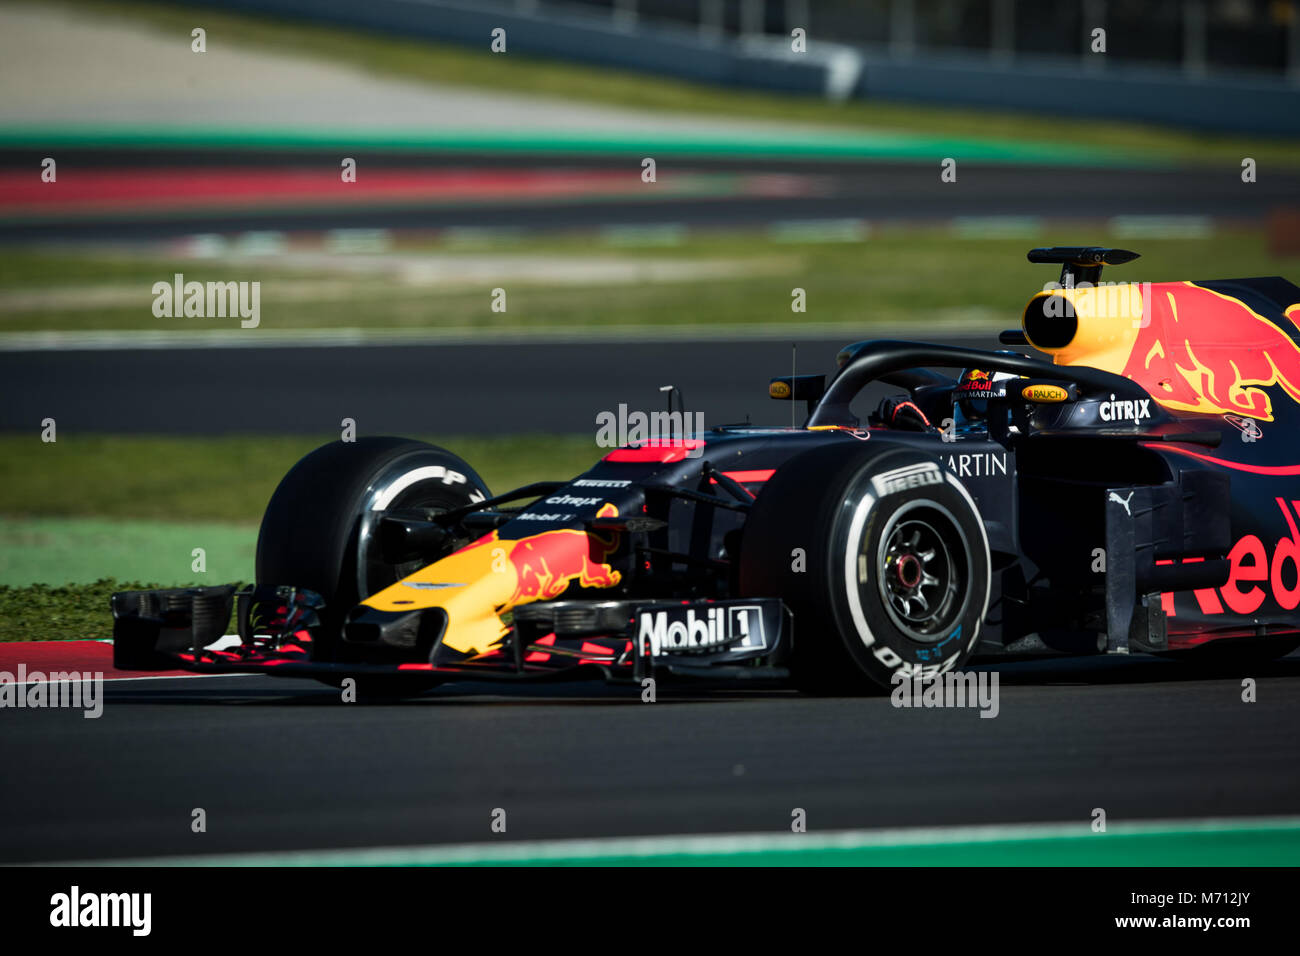 Montmelo, Catalonia, Spain. 7th Mar, 2018. Daniel Ricciardo of RedBull Racing team with Red Bull RB14 car during F1 Test Days in Montmelo circuit. Credit:  MA 6340.jpg/SOPA Images/ZUMA Wire/Alamy Live News Stock Photo